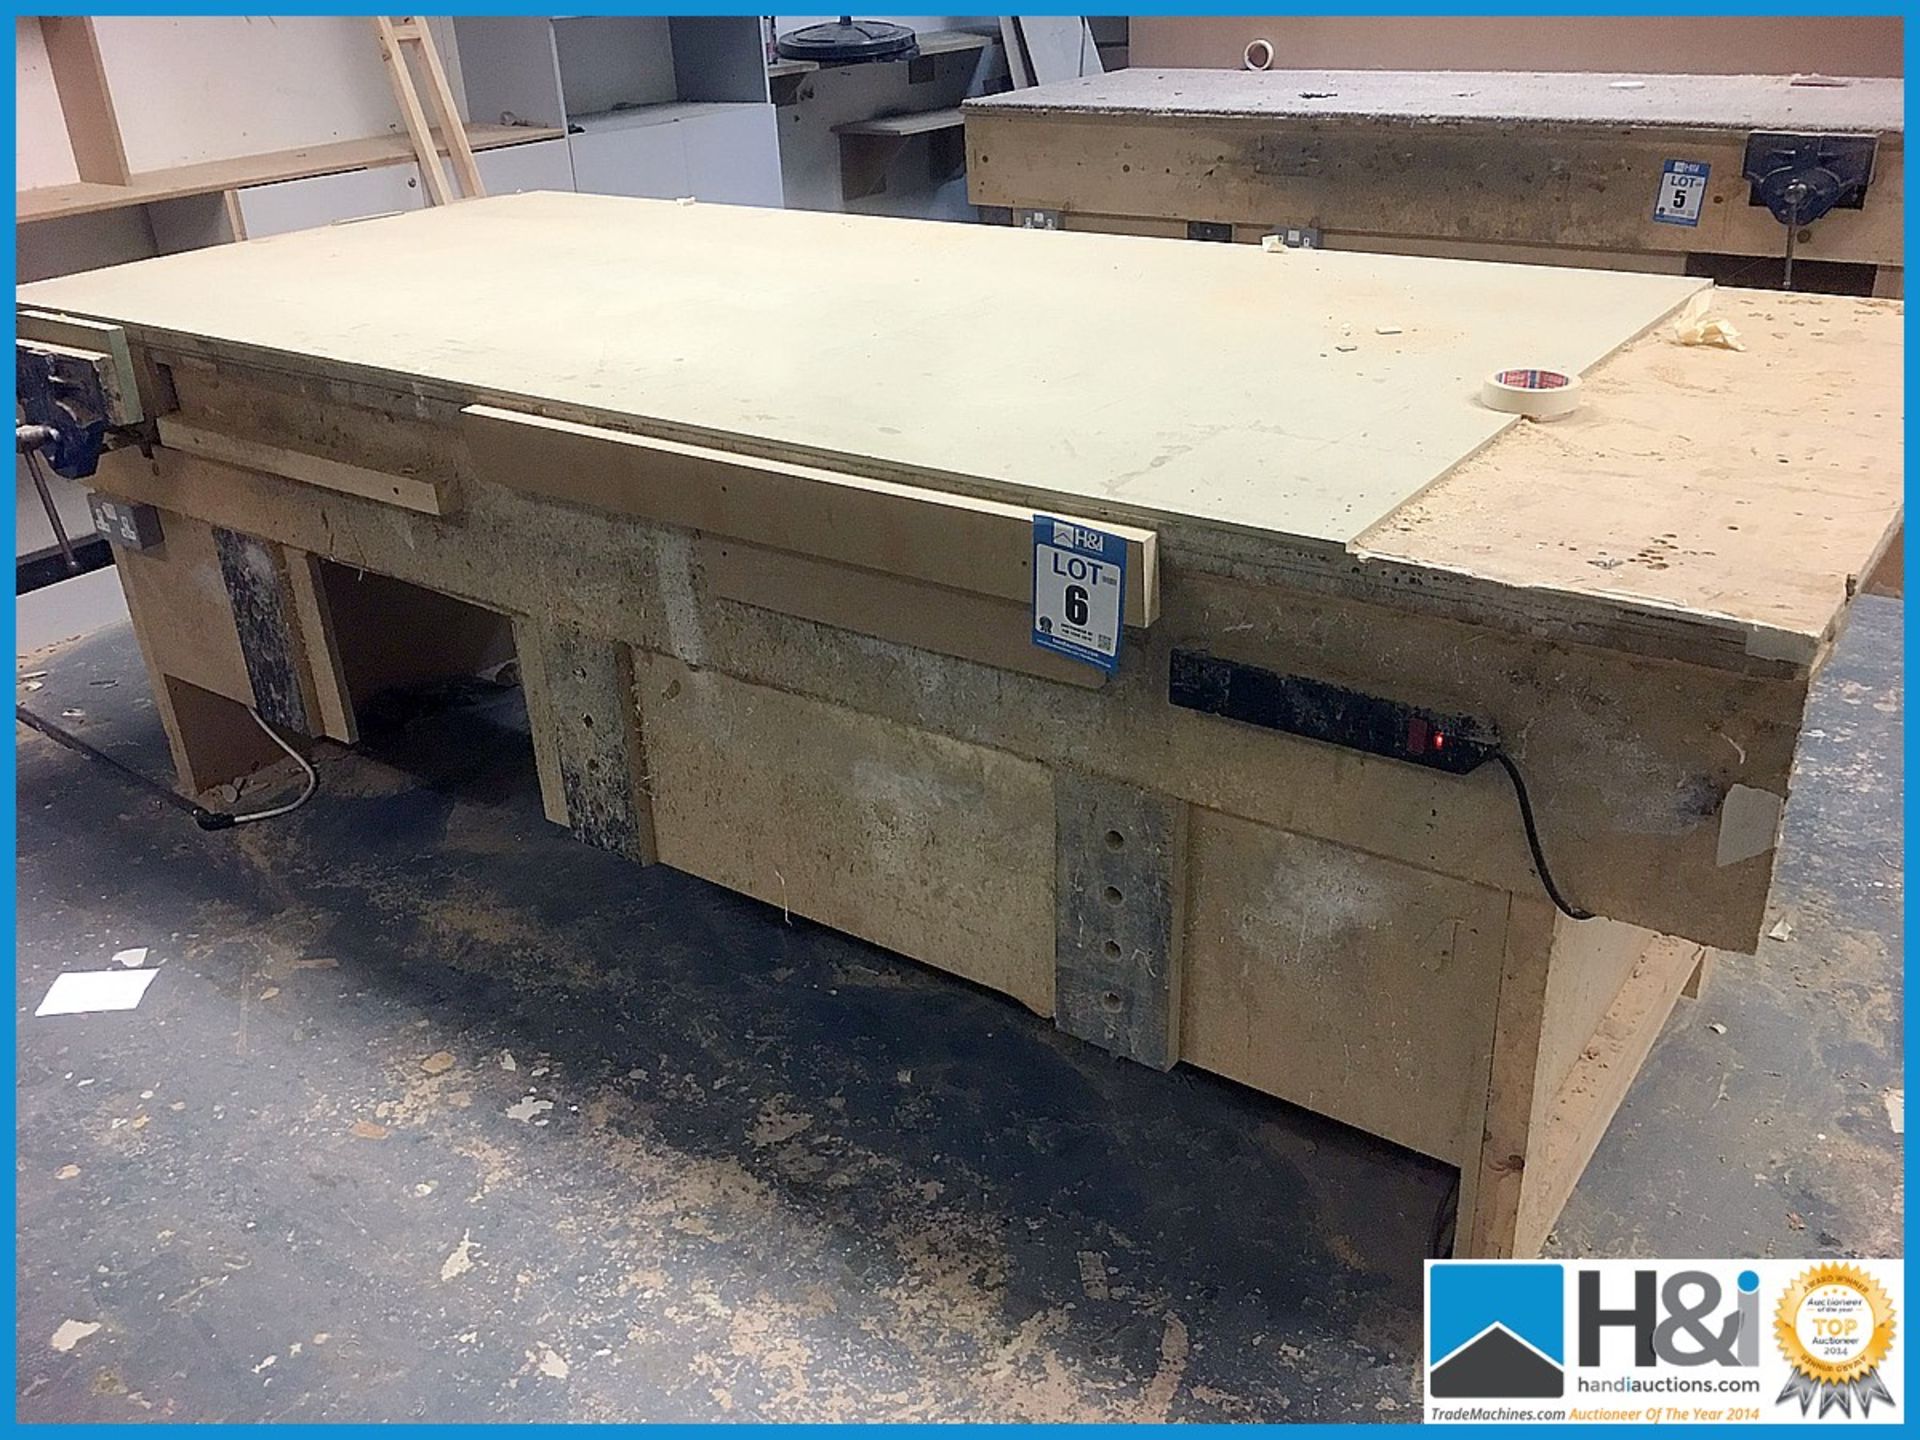 Good sturdy 8ft joiners workbench with power sockets and quick release vice Appraisal: Used, good.